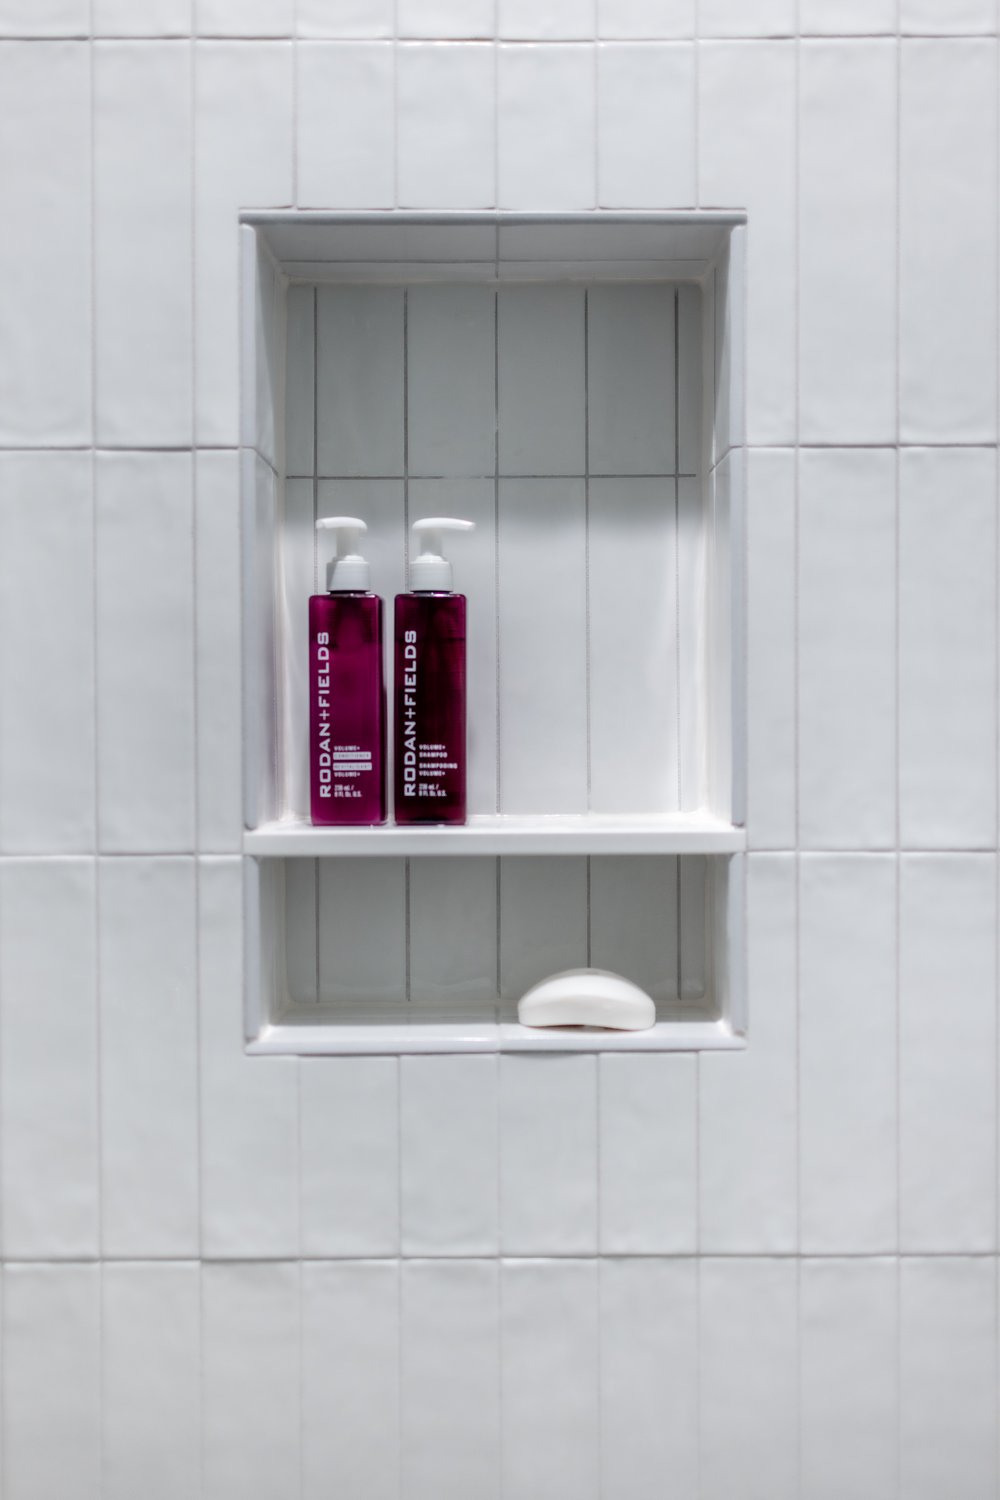  White shower tile in a vertical stack pattern with niche 